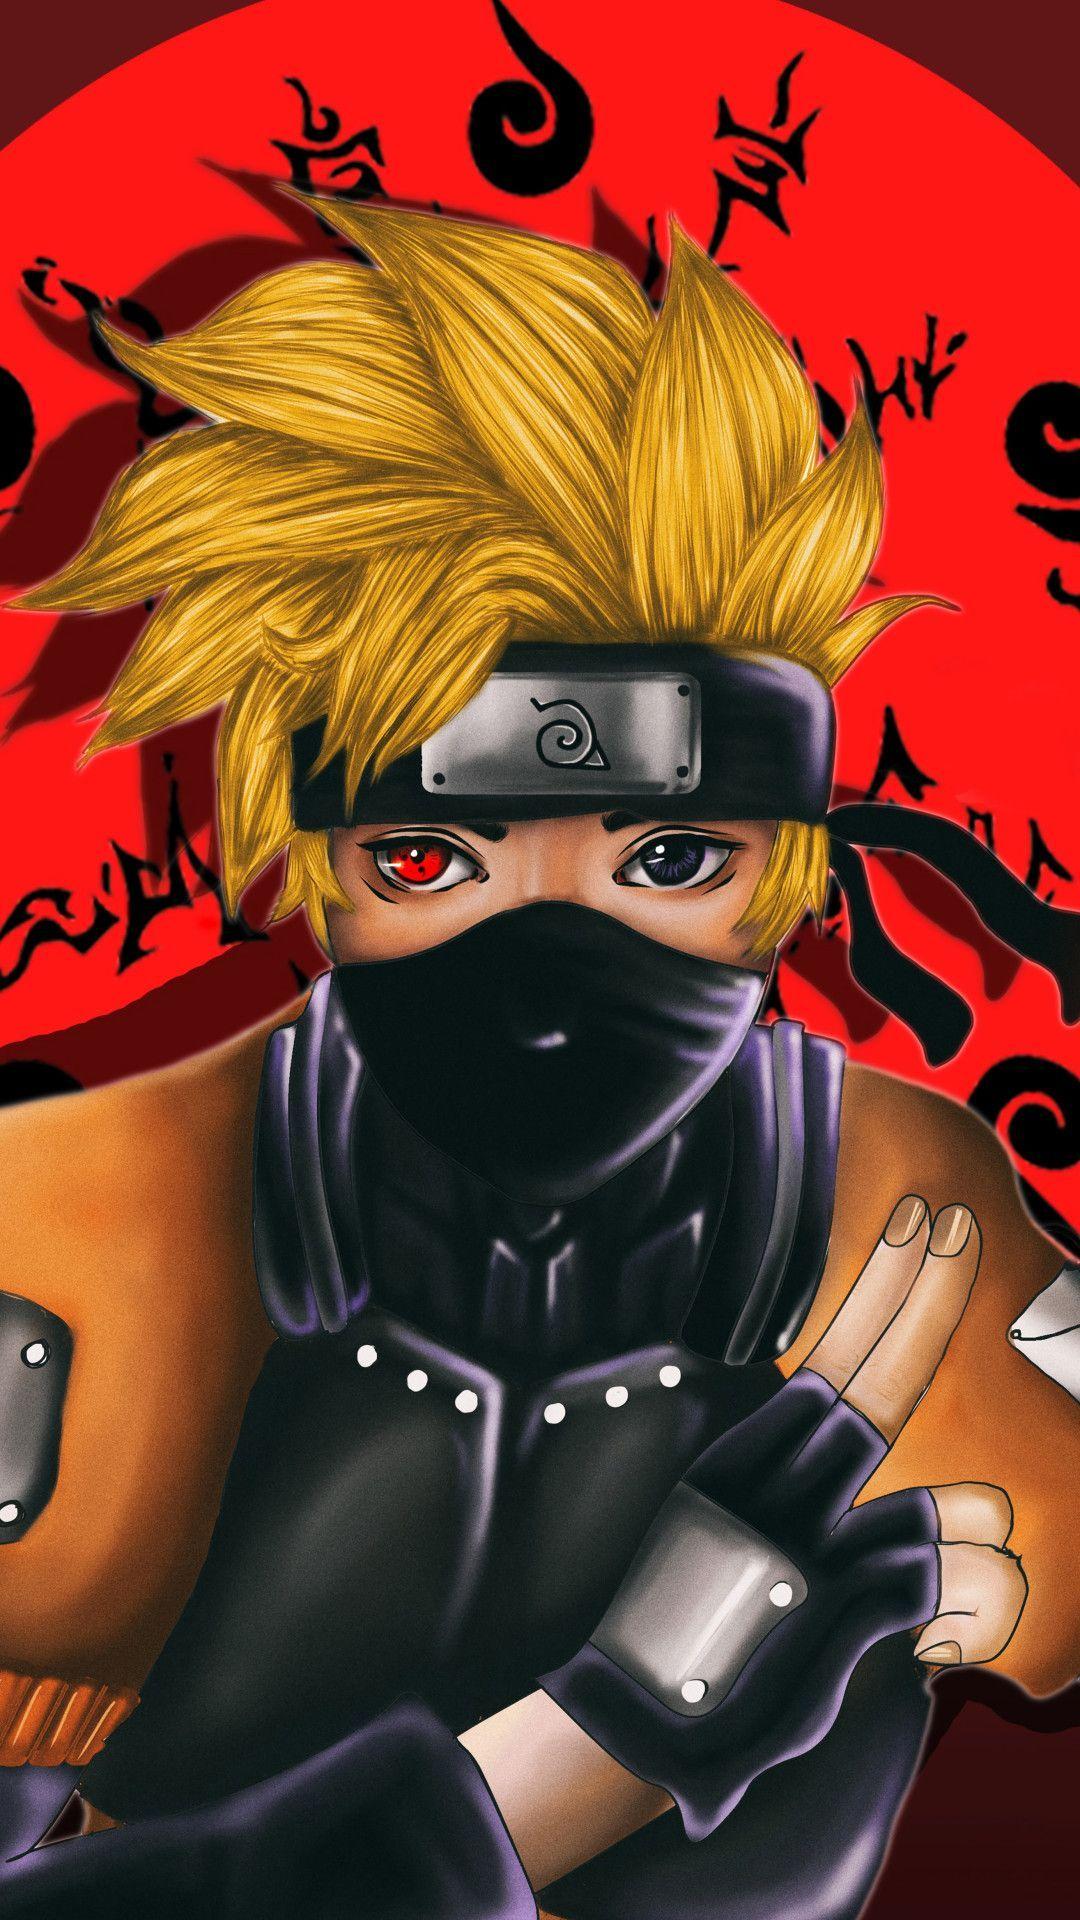 71+ 4K Naruto Wallpapers: HD, 4K, 5K for PC and Mobile